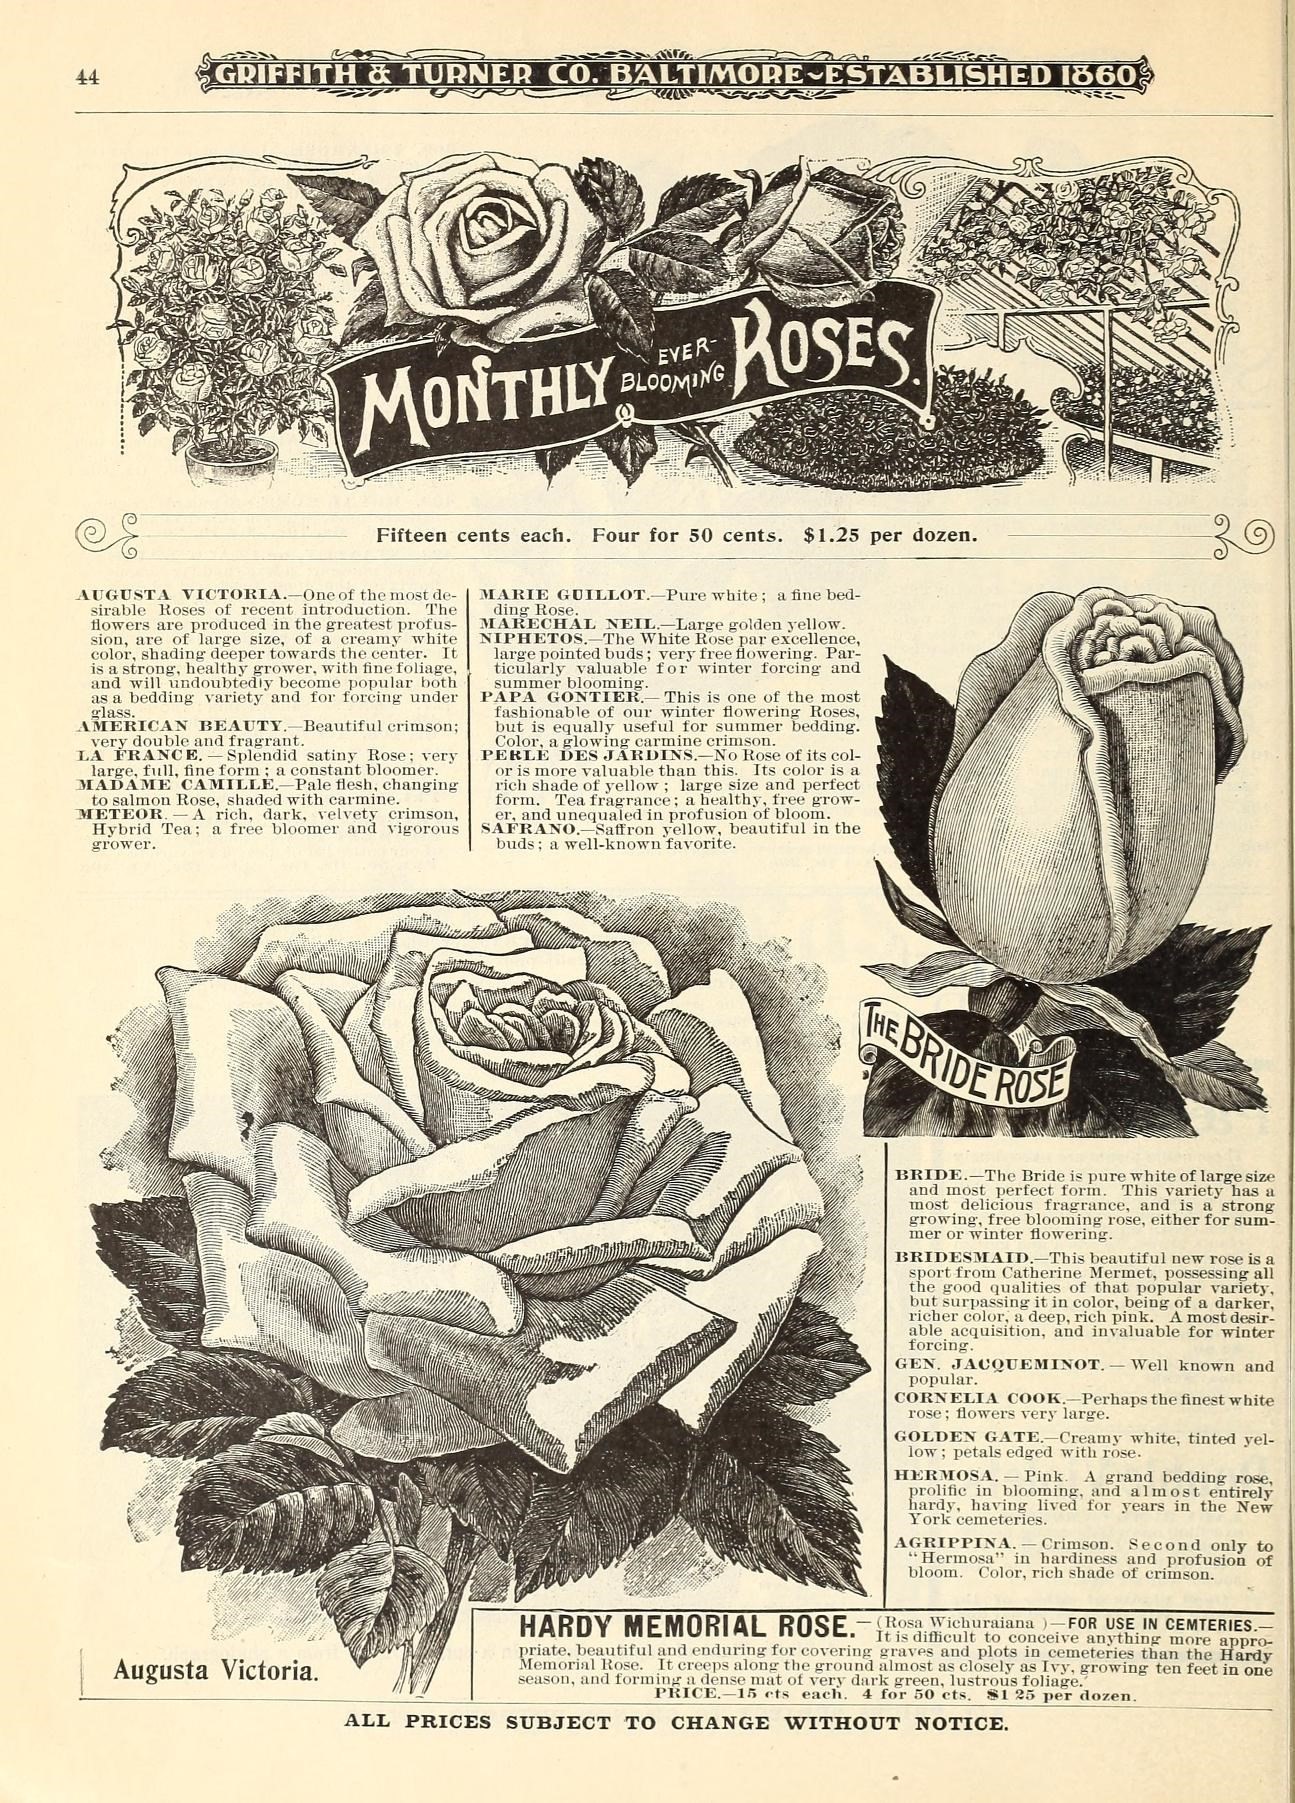 the rose book is open on a page